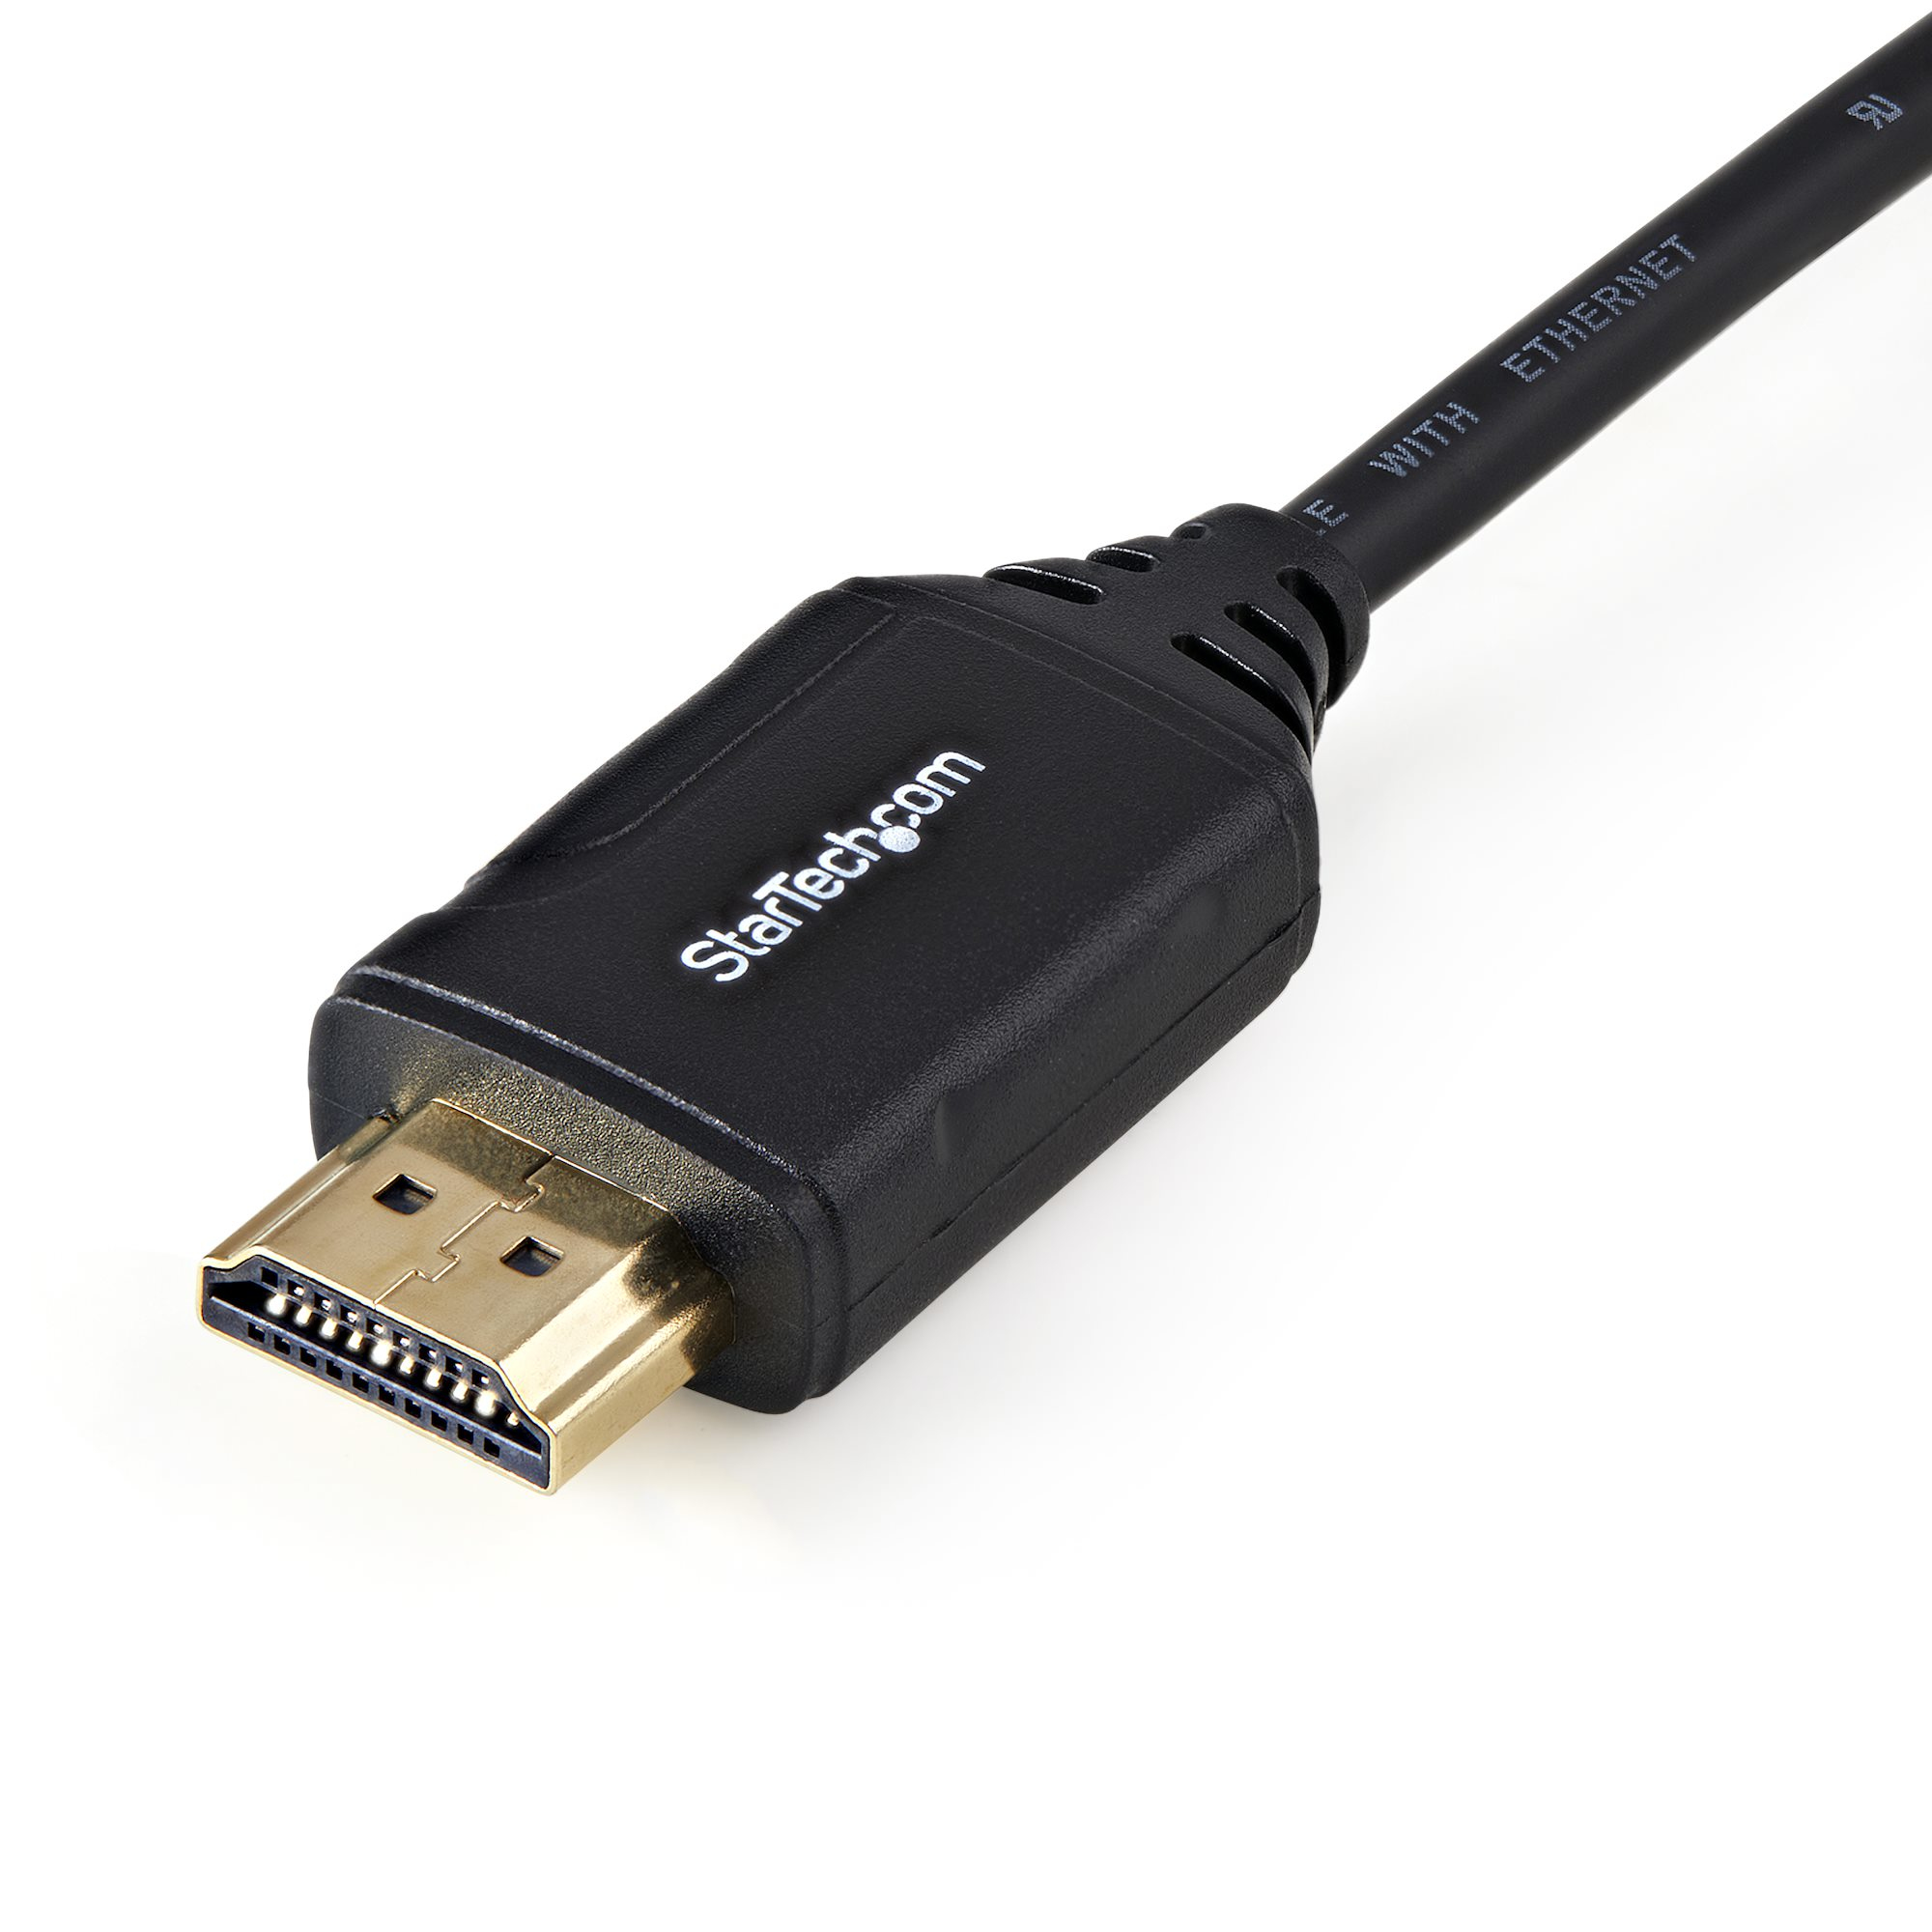 4K@60Hz Certified Premium High Speed HDMI Cable w/ Ethernet - 6 ft.